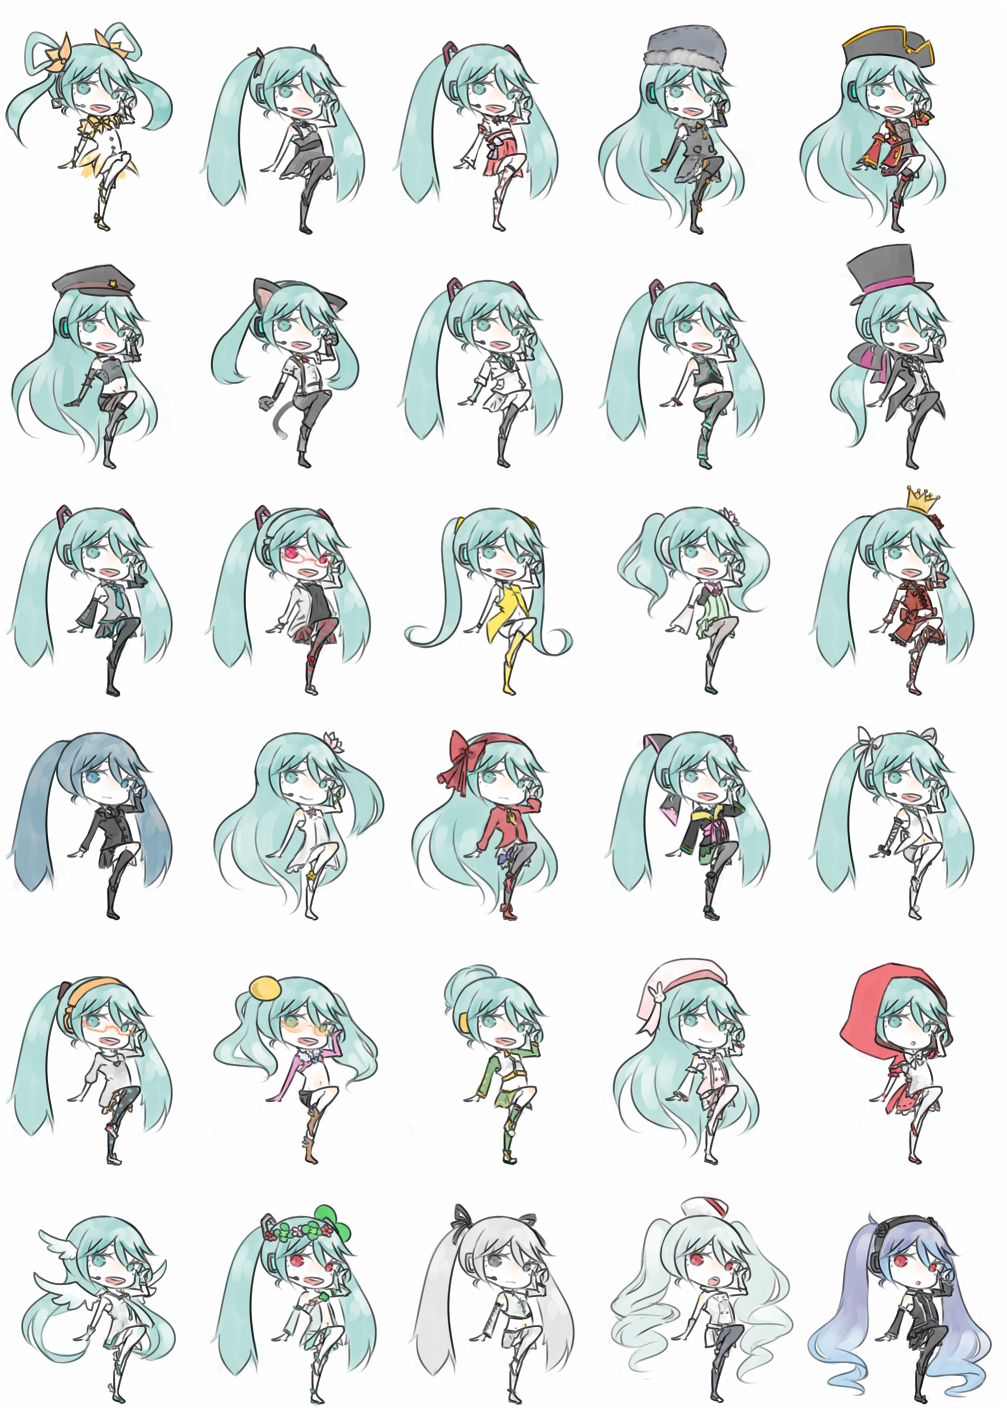 aile_d'ange_(module) alternate_color alternate_costume alternate_hair_color angel_(module) animal_ears aqua_eyes aqua_hair bare_shoulders beret black_legwear blue_hair boots bracelet cat_ears cat_tail chibi chibibro chou_(module) colorful_drop_(module) colorful_x_melody_(vocaloid) cosplay crown dancer_(module) detached_sleeves dress fairy_(module) fishnet_pantyhose fishnets frills glasses grey_hair hair_bun hair_down hair_ribbon hat hatsune_miku hatsune_miku_no_gekishou_(vocaloid) hatsune_miku_no_shoushitsu_(vocaloid) head_wings headphones headset high_heels highres hood infinity_(module) jacket jersey_(module) jewelry kemonomimi_mode kocchi_muite_baby_(vocaloid) koiiro_byoutou_(vocaloid) little_red_riding_hood little_red_riding_hood_(grimm) little_red_riding_hood_(grimm)_(cosplay) long_hair magician magician_(module) magnet_(vocaloid) miko_(module) mikuzukin_(module) miracle_paint_(vocaloid) multicolored_hair multiple_persona multiple_views natural_(module) navel necktie noble_(module) nyan_ko_(module) open_mouth outstretched_arm pantyhose pink_pops_(module) pirate_(module) pleated_skirt poppippoo_(vocaloid) powder_(module) project_diva project_diva_(series) project_diva_2nd punk_(module) purple_hair red_eyes ribbon saihate_(vocaloid) school_(module) semi-rimless_eyewear shoes shorts skirt smile snow_(module) spacey_nurse_(module) spiritual_(module) tail thighhighs top_hat twintails very_long_hair vintage_dress_(module) vocaloid voice_(vocaloid) white_background white_one-piece_(module) wings yellow_(vocaloid)